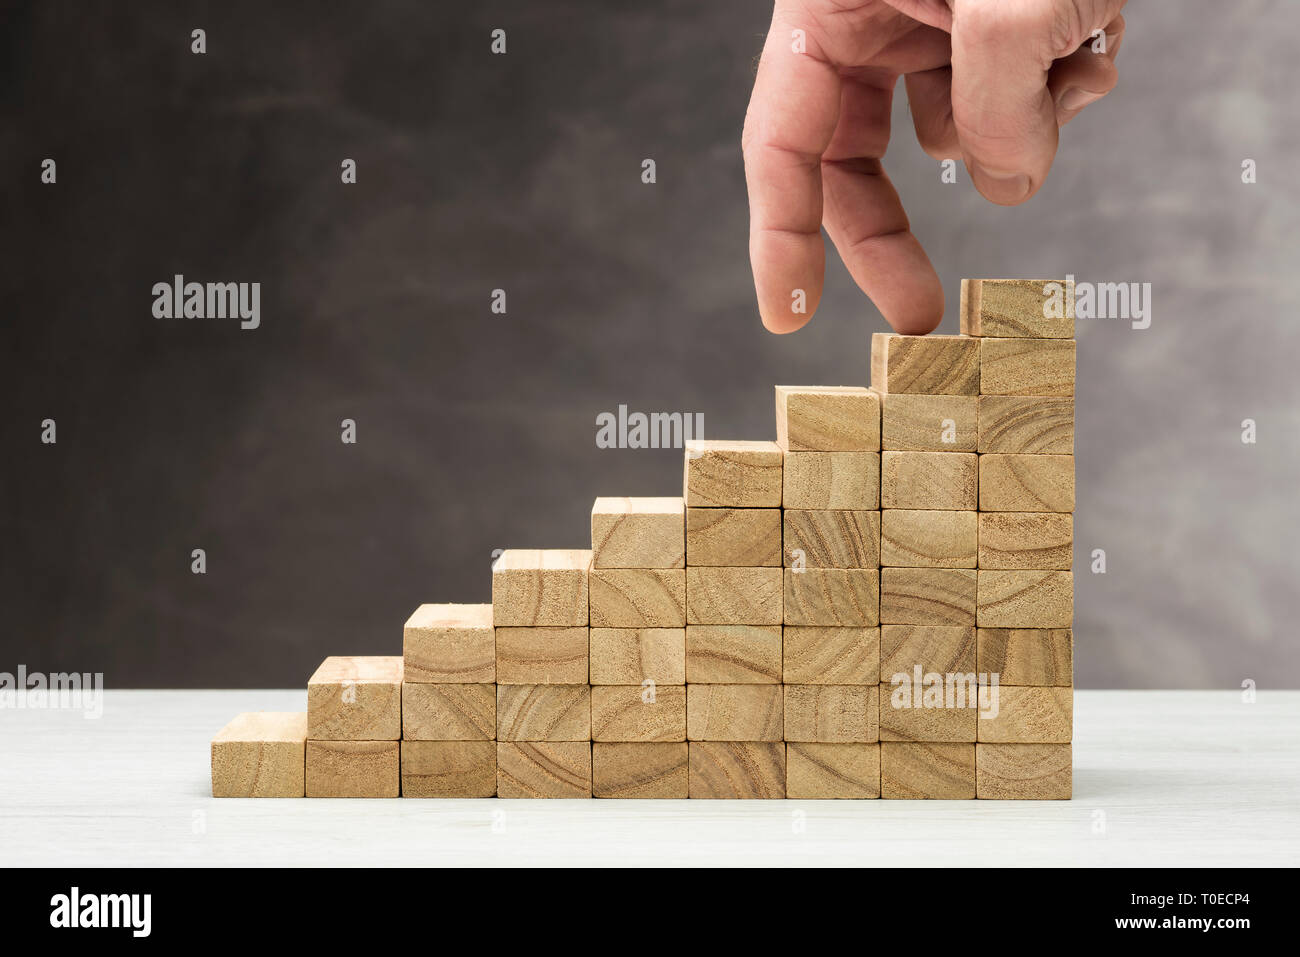 Concept of decrease. Graphic with wooden steps on grey background with hand coming down. Stock Photo